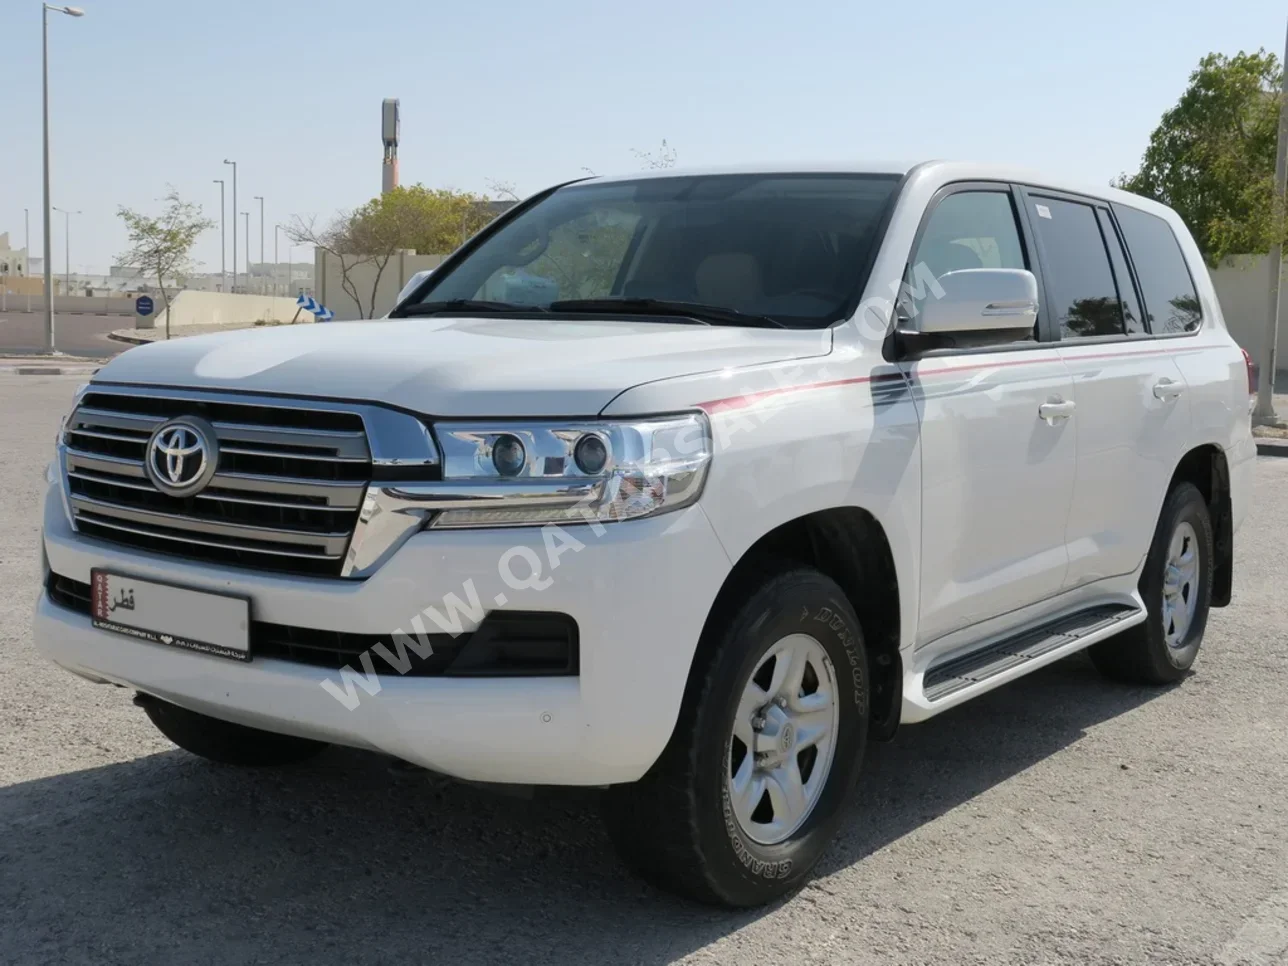 Toyota  Land Cruiser  GXR  2020  Automatic  72,000 Km  6 Cylinder  Four Wheel Drive (4WD)  SUV  White  With Warranty